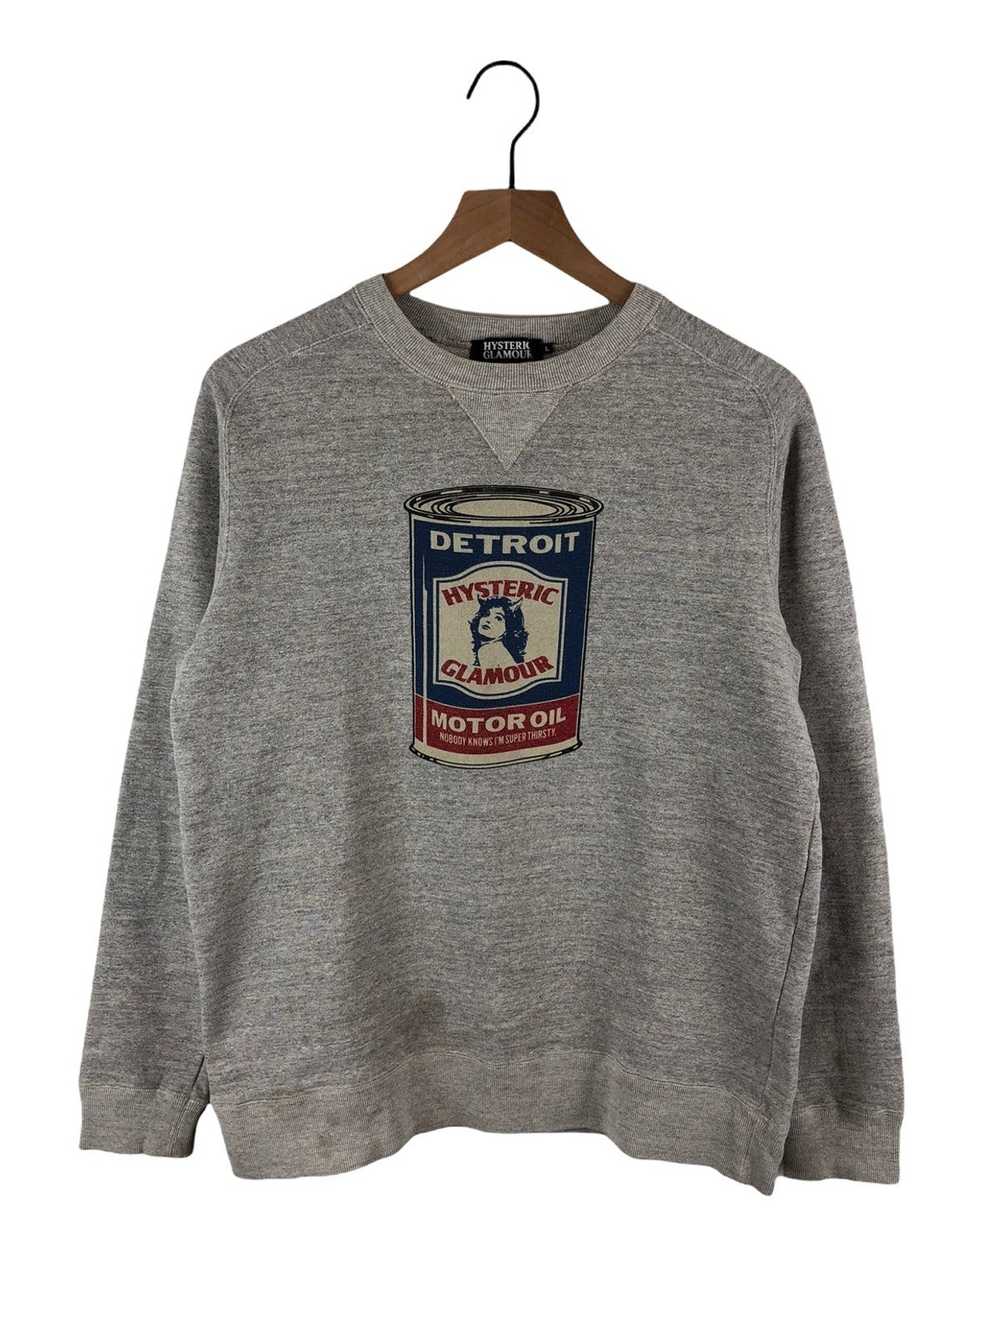 Hysteric Glamour Hysteric Glamour Print Sweatshirt - image 1